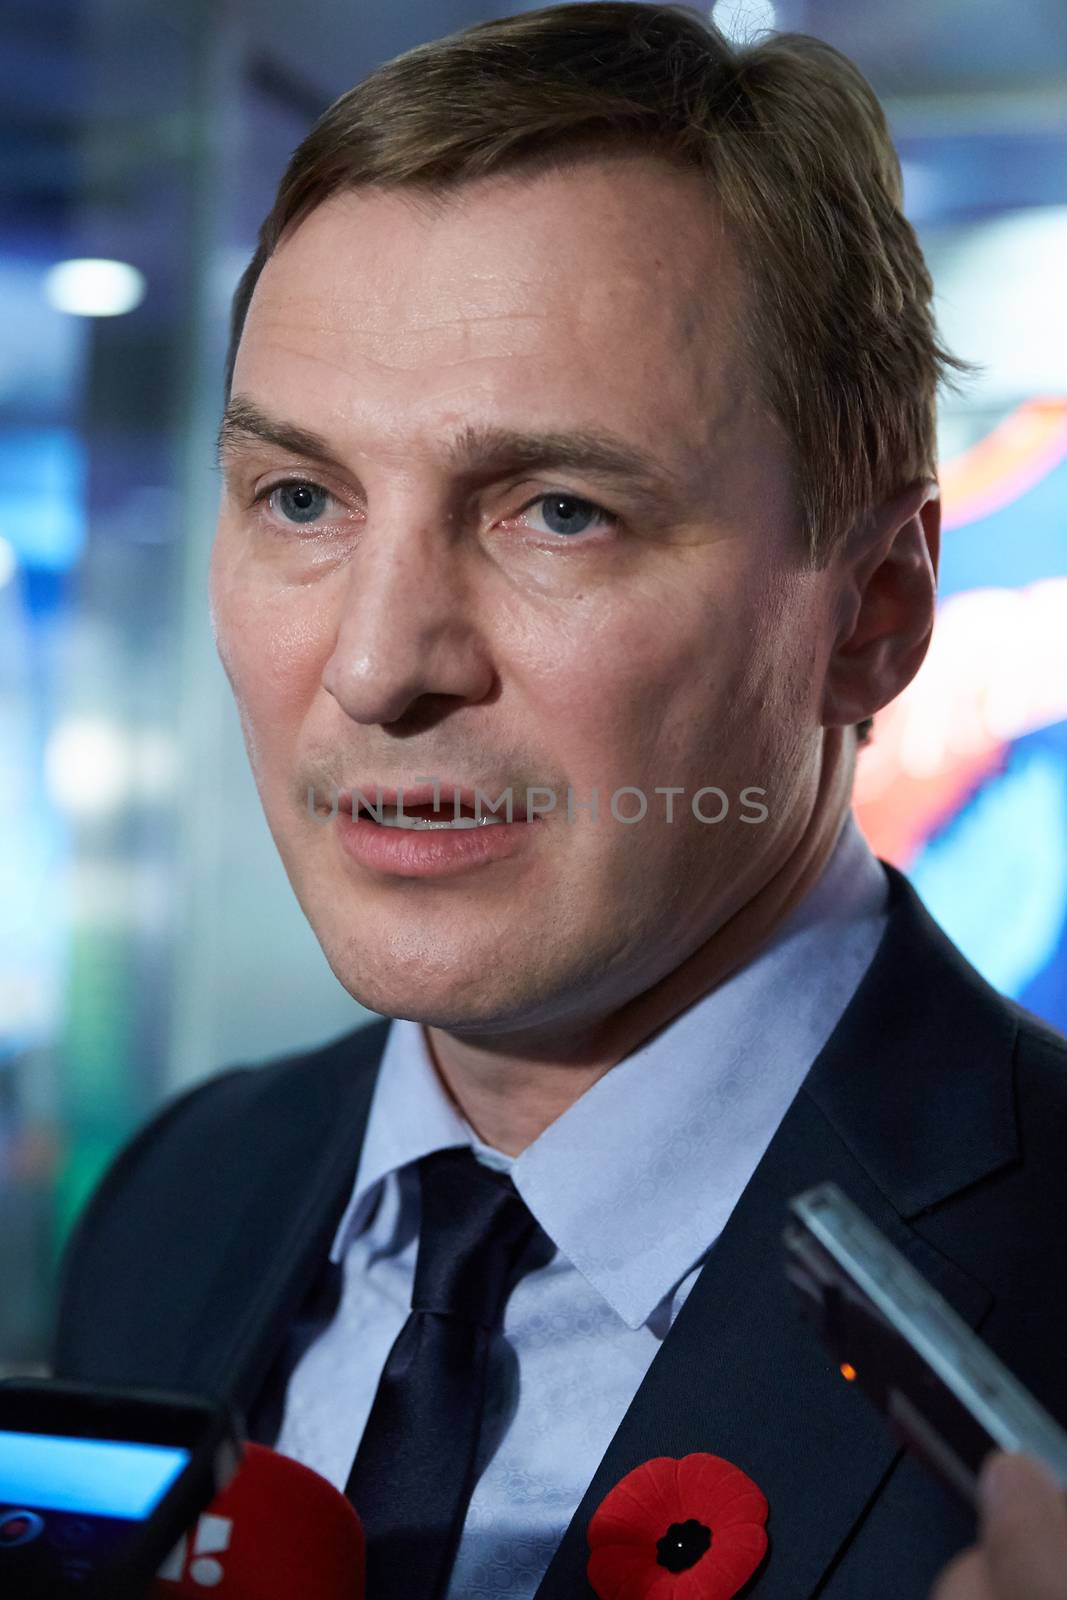 CANADA, Toronto: Sergei Federov, Chris Pronger, Niklas Lidstrom, Phil Housley, Angela Ruggiero, Bill Hay and Peter Karamanos Jr. were the seven inductees honoured at the Hockey Hall of Fame and Museum on November 6, 2015.